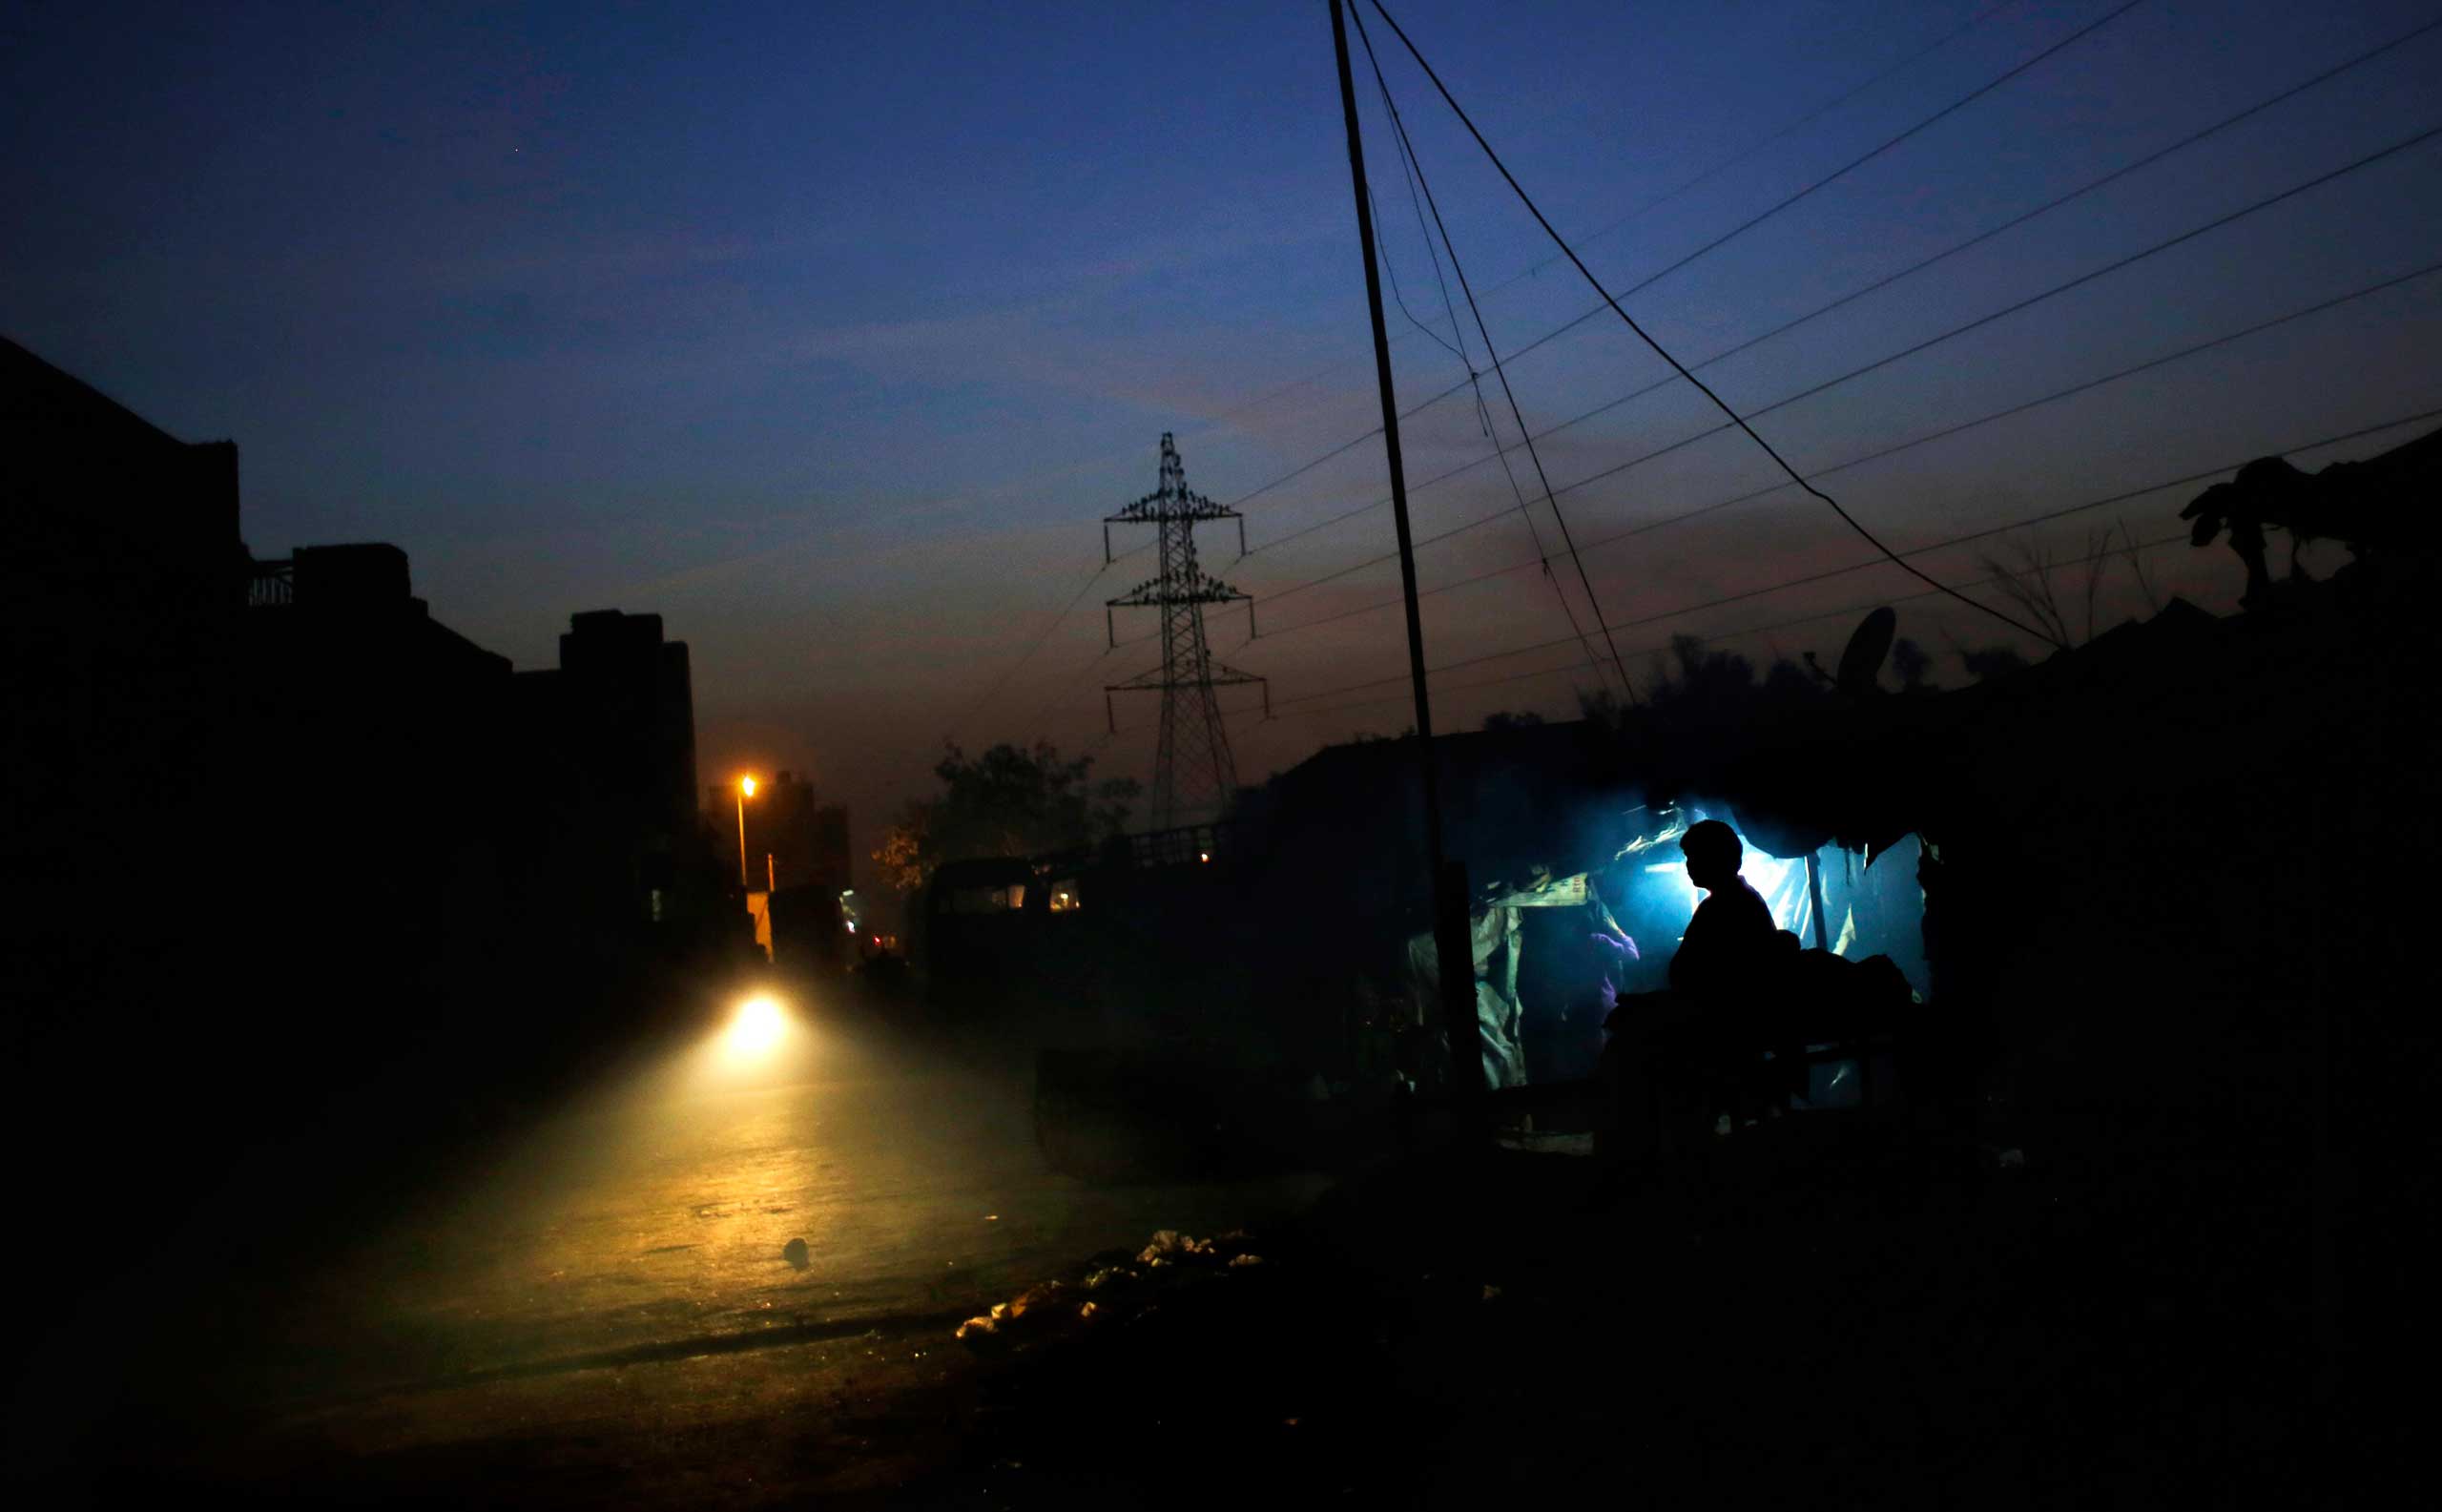 Nov. 13, 2014. An Indian man is silhouetted as he sits outside a roadside tea stall during a power outage on the outskirts of New Delhi. Long power cuts are common in rural and semi urban areas throughout India.